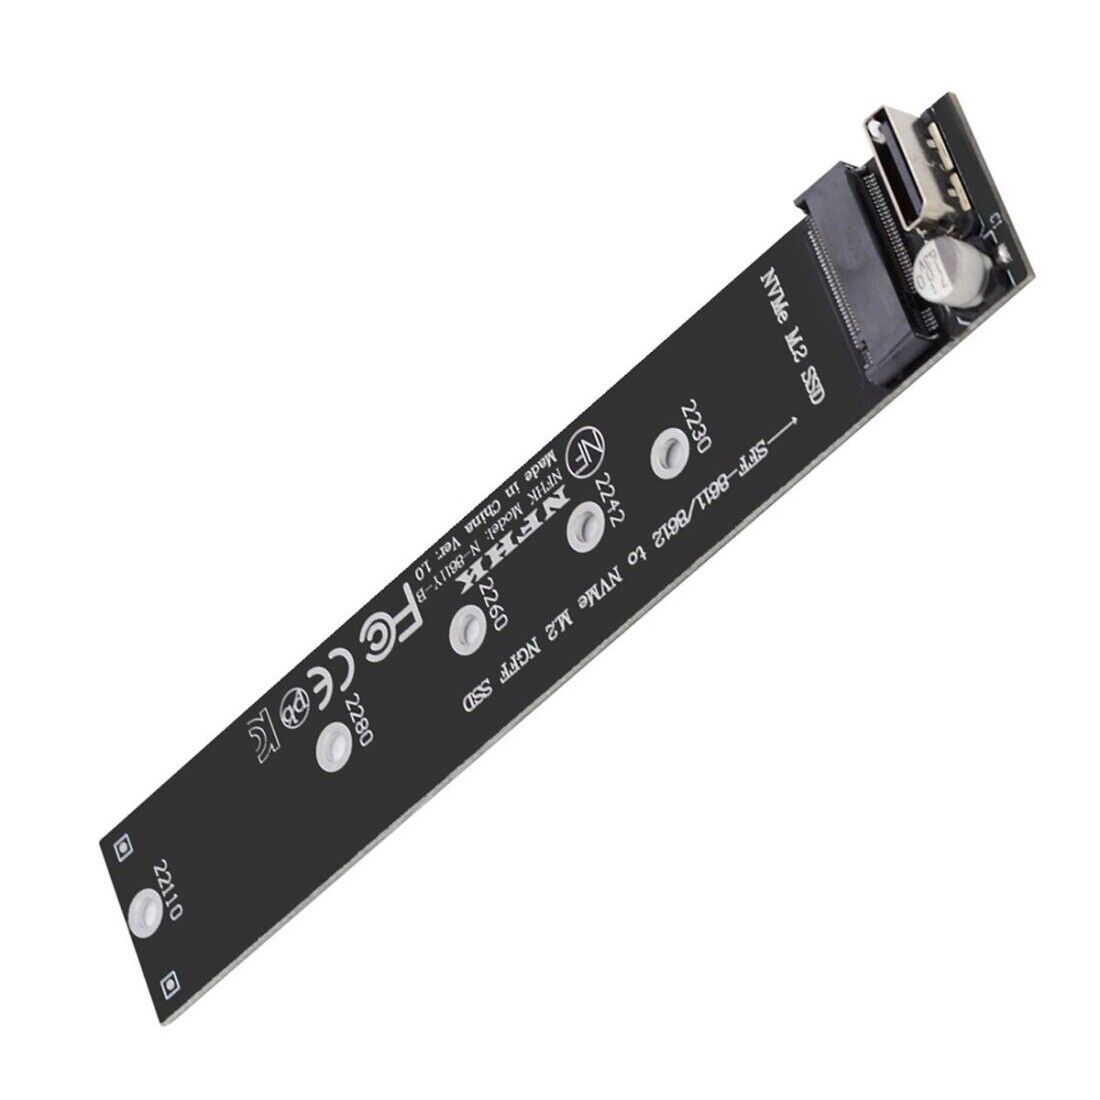 M.2 to SFF-8611 Adapter,Oculink SFF-8612 SFF-8611 to NVME PCIe SSD M-Key Adapter